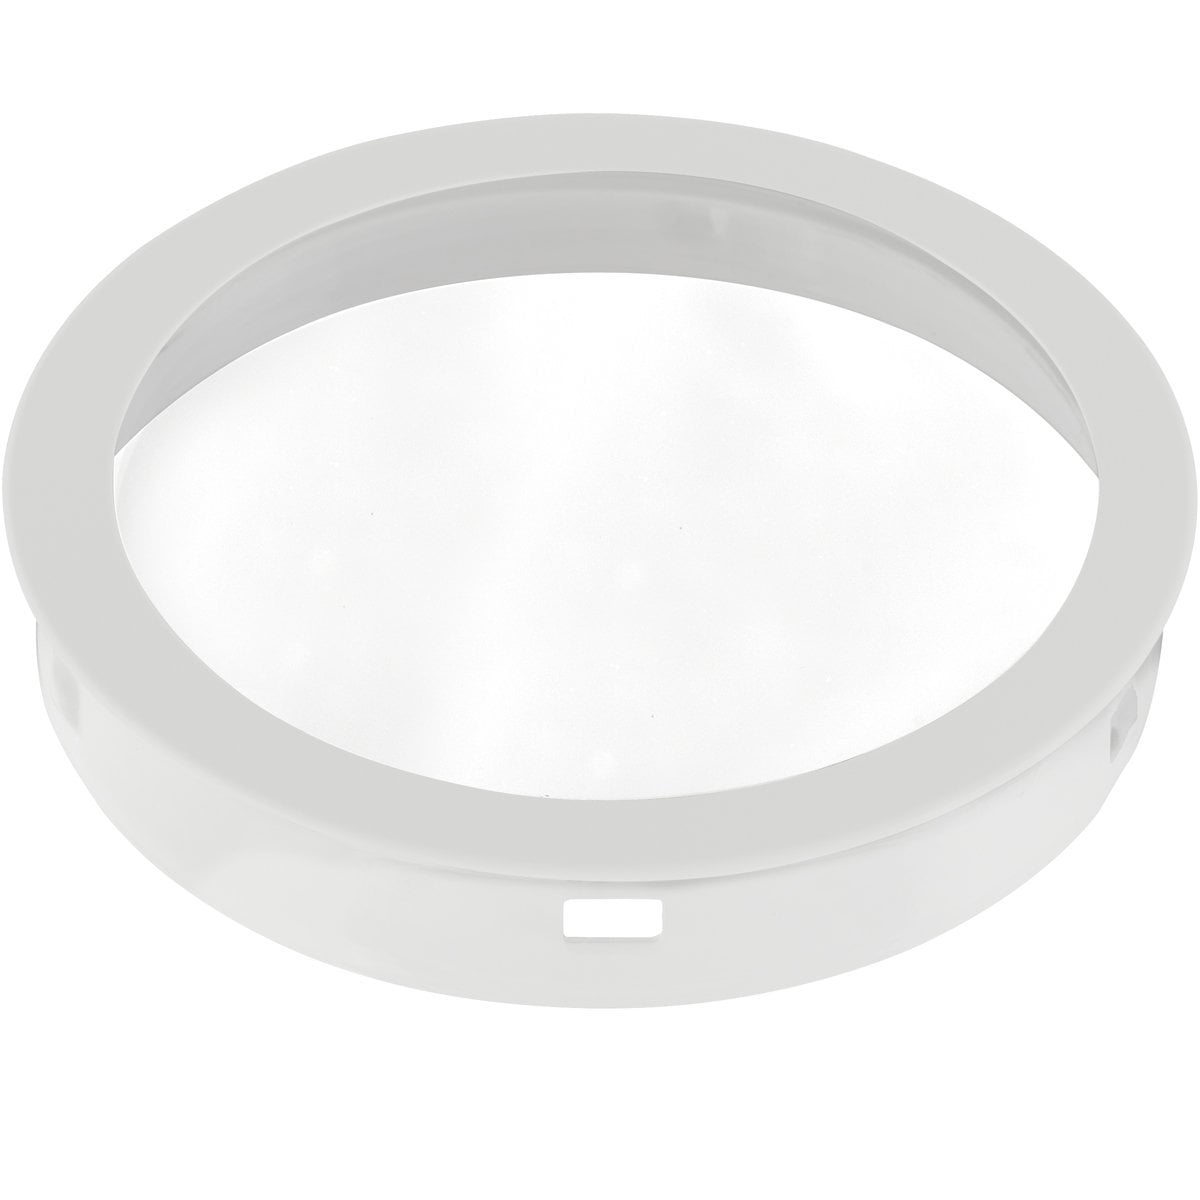 White Progress Lighting P8799-30 Top Cover Lenses for P5675 Cylinder Adapts Up/Down Fixtures for Wet Location Use Heat and Shatter-Resistant Clear Tempered Lens with Black Trim